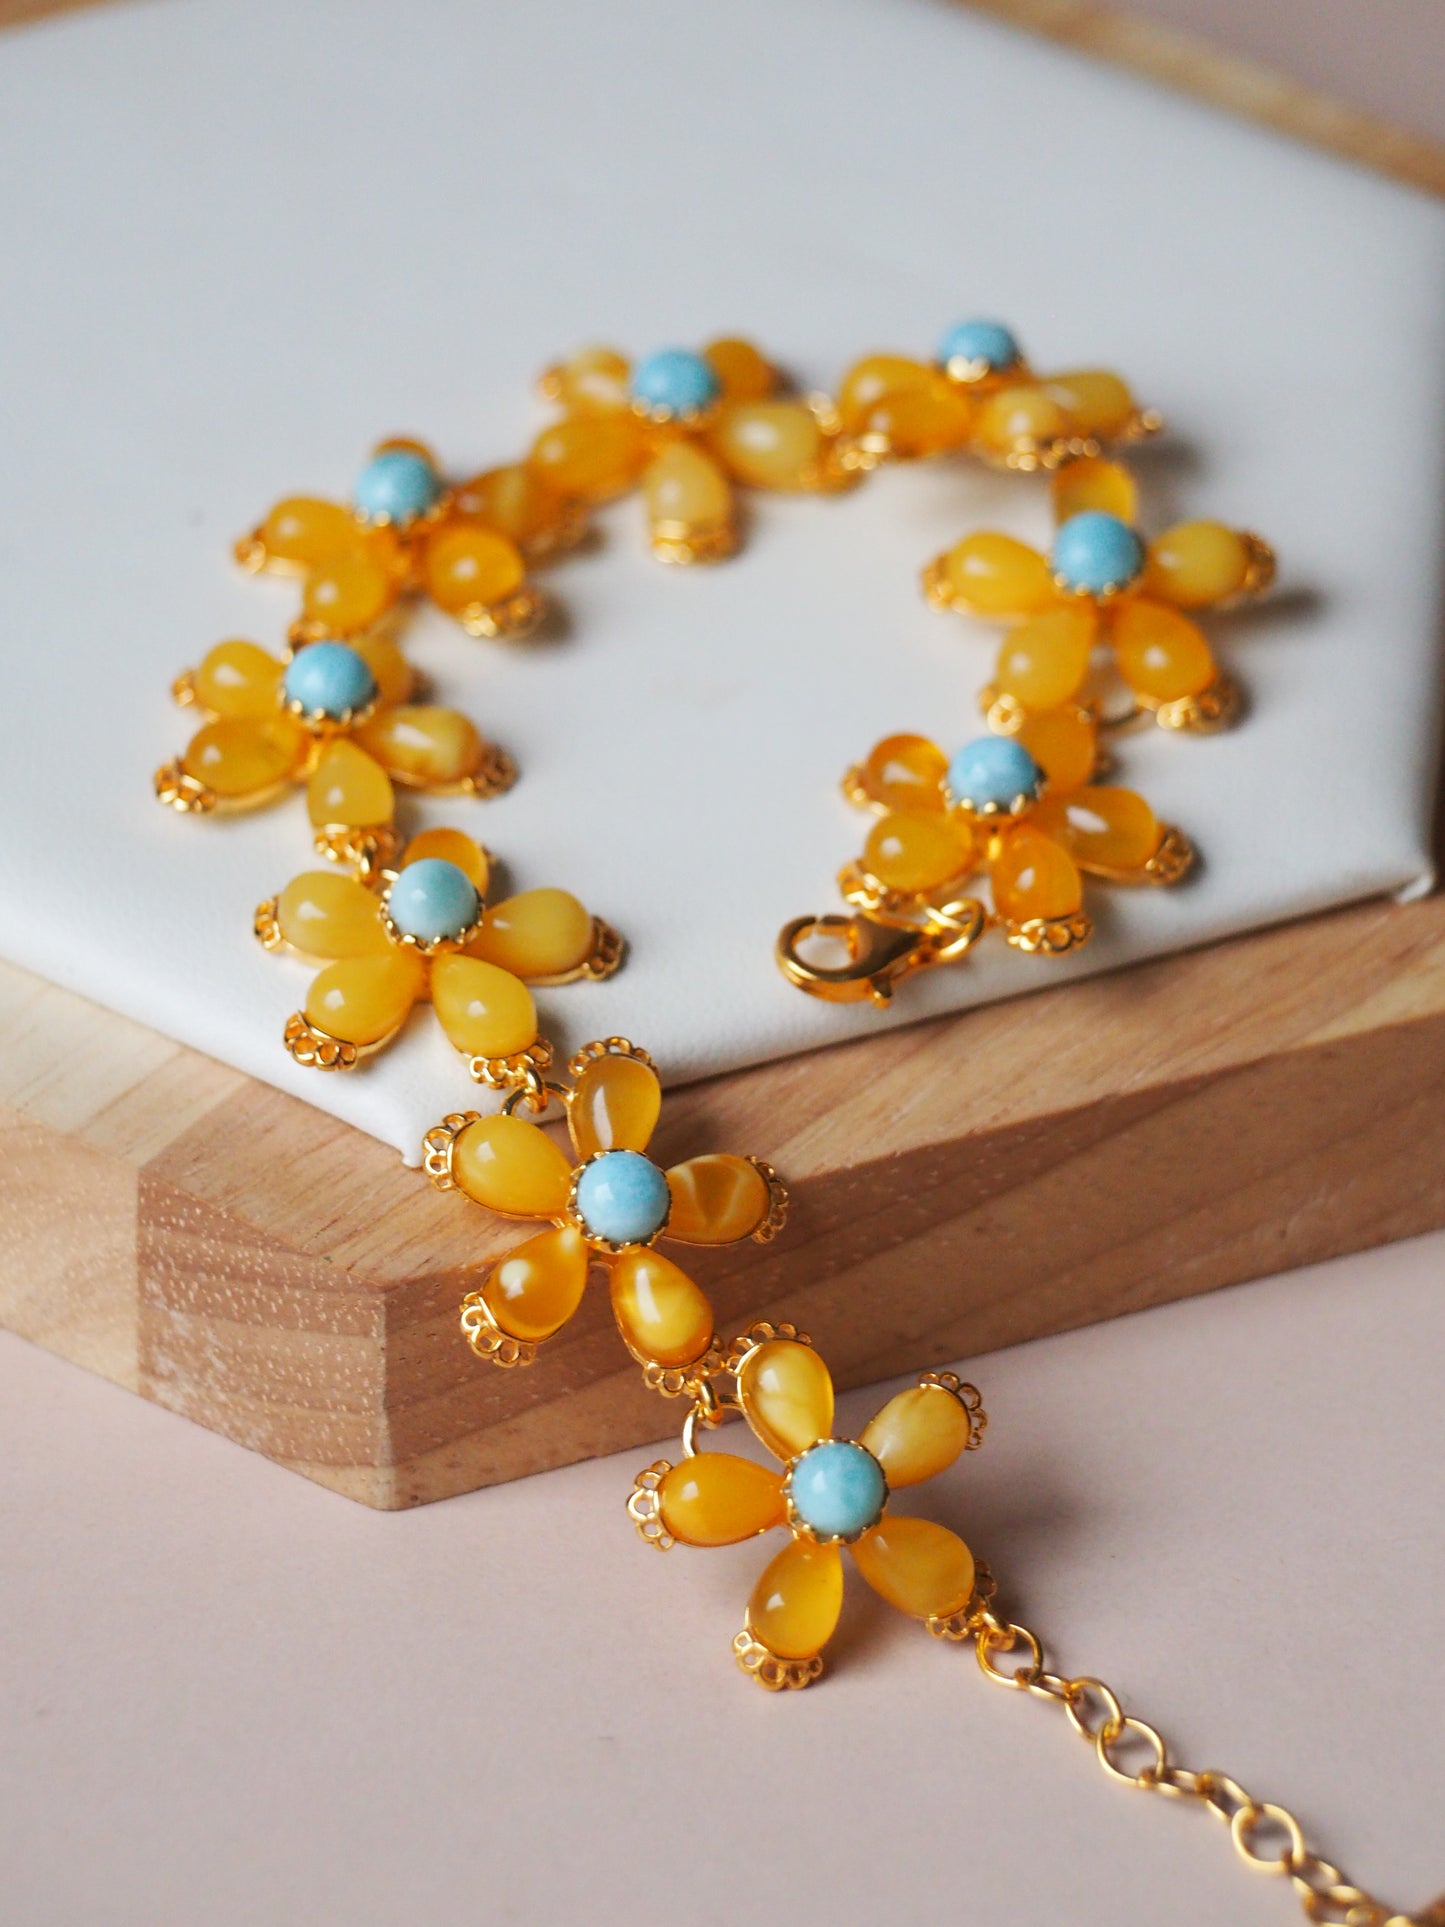 Natural Butterscotch/ Honey/ Royal White Amber Bracelet with Turquoise Stone